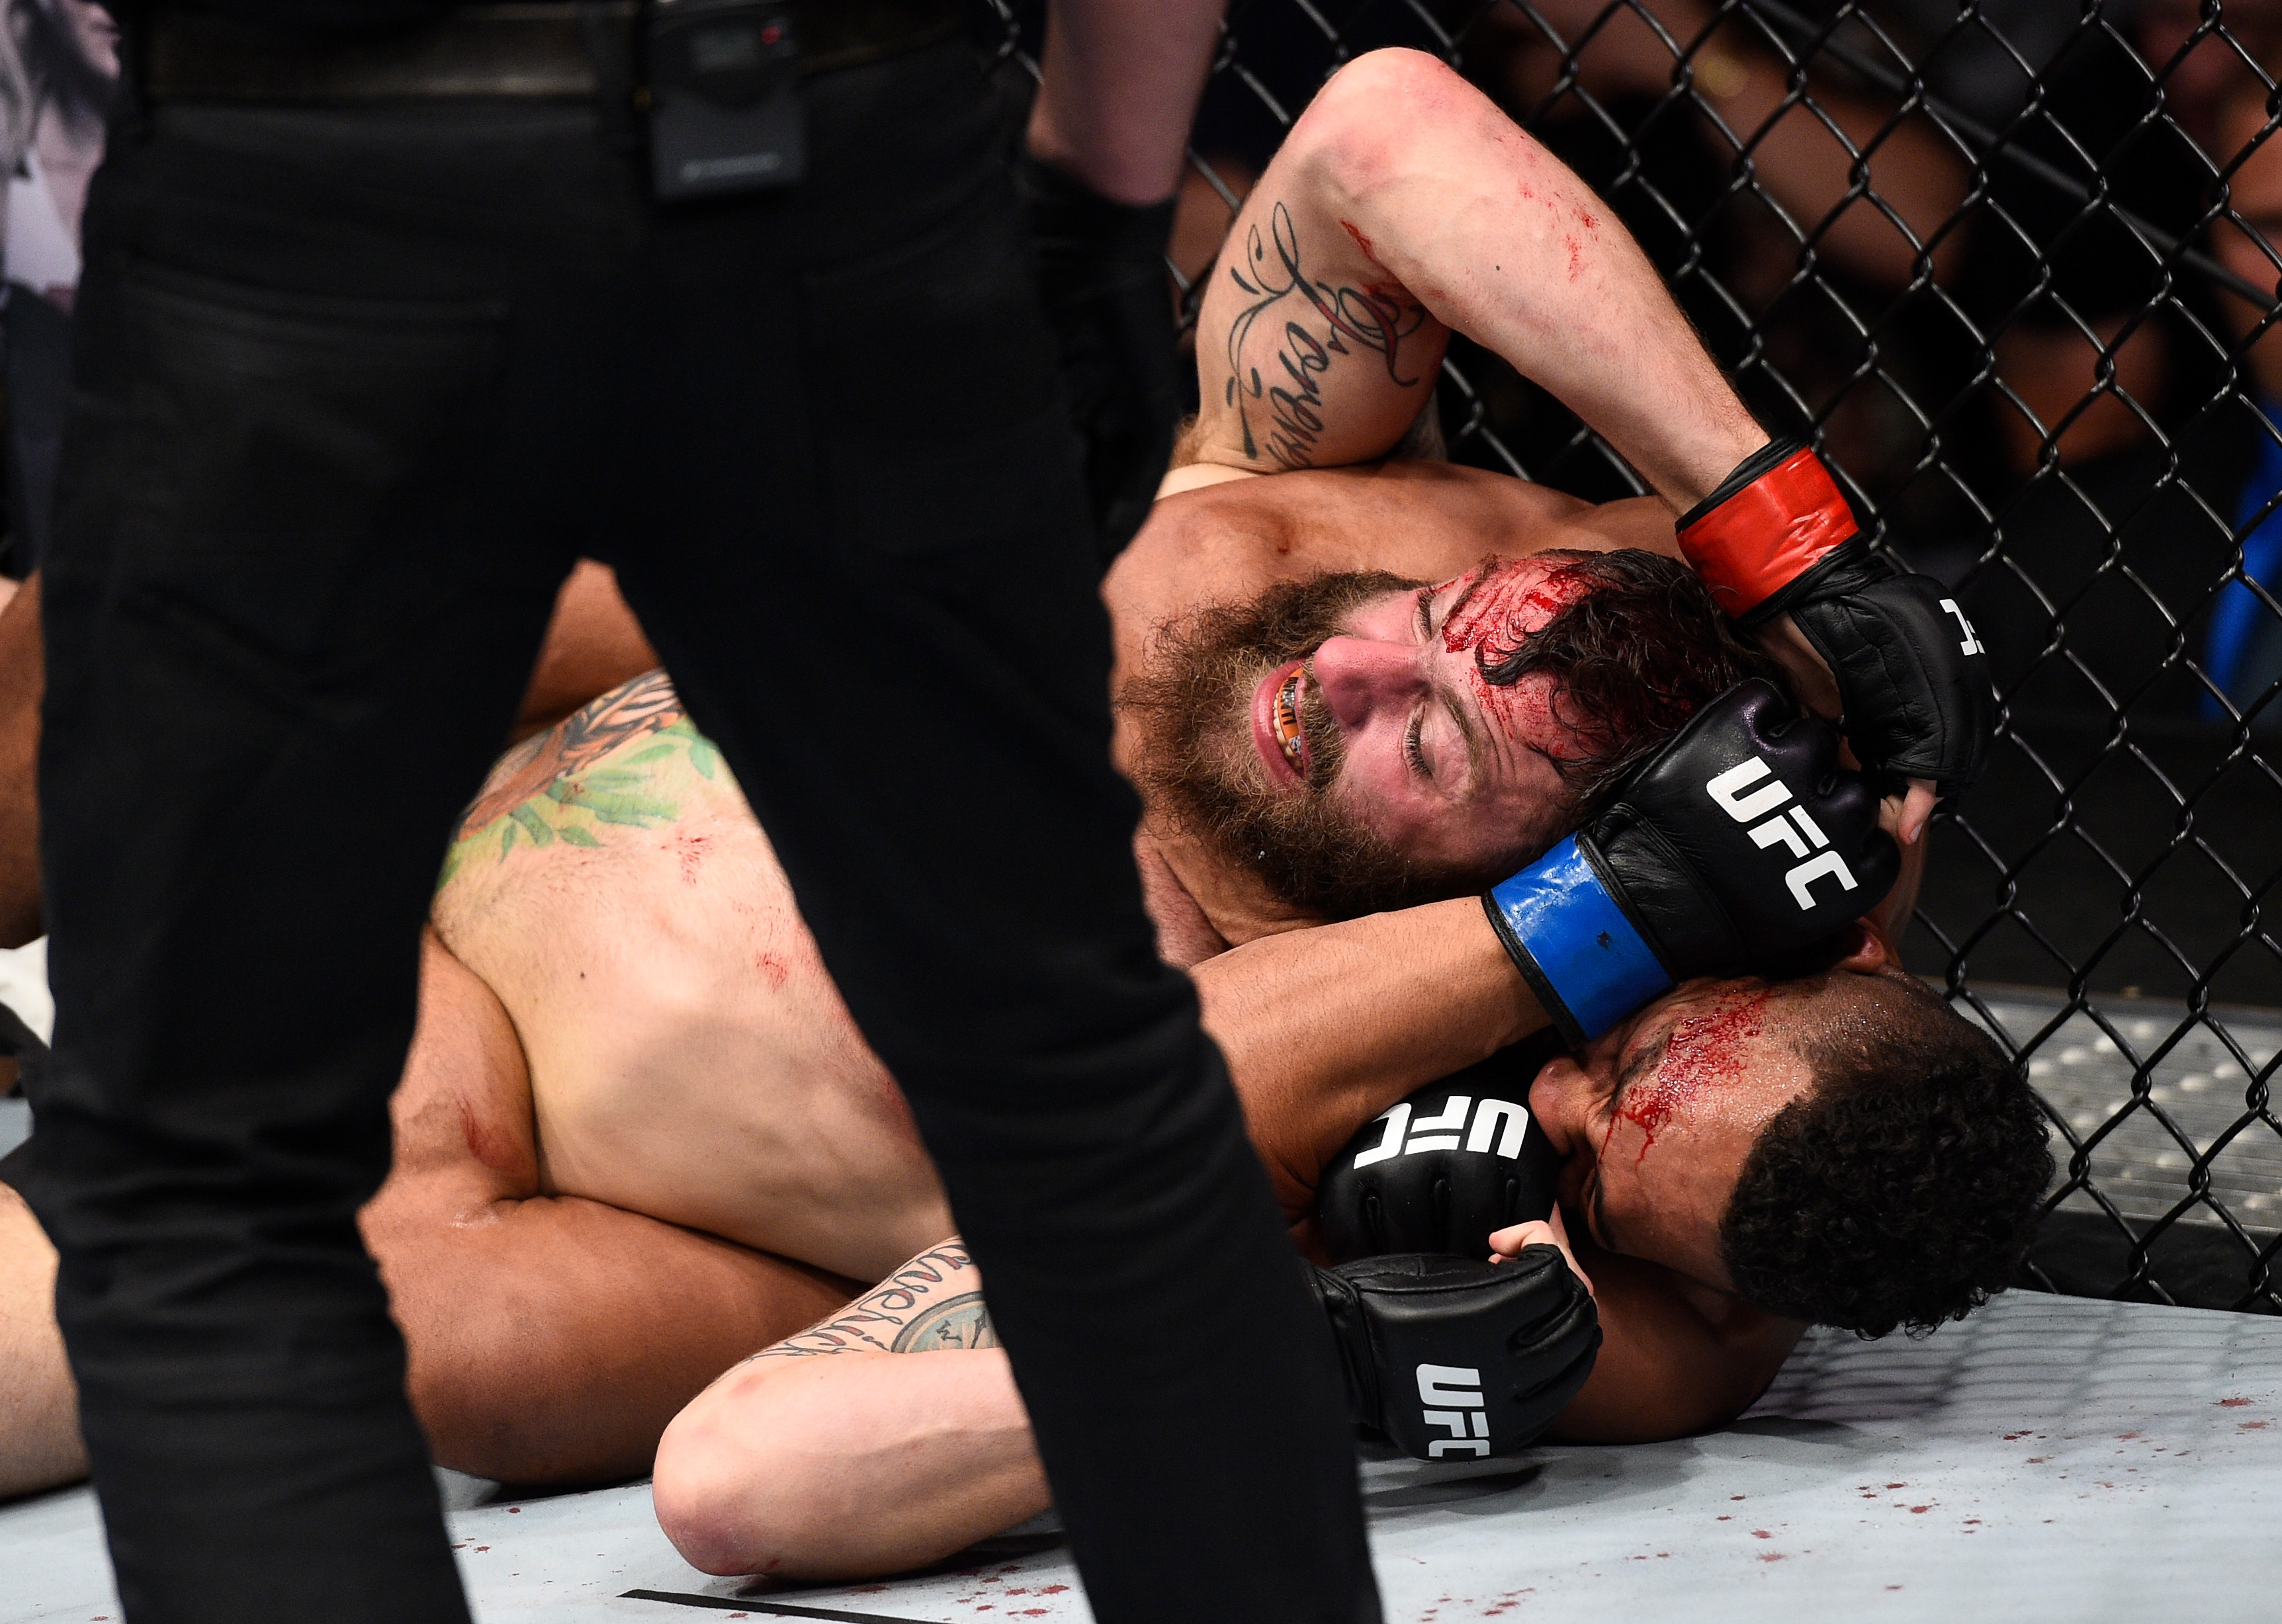 OKLAHOMA CITY, OK - JUNE 25: (R-L) Kevin Lee attempts to submit Michael Chiesa with a rear choke in their lightweight bout during the UFC Fight Night event at the Chesapeake Energy Arena on June 25, 2017 in Oklahoma City, Oklahoma. (Photo by Brandon Magnus/Zuffa LLC)